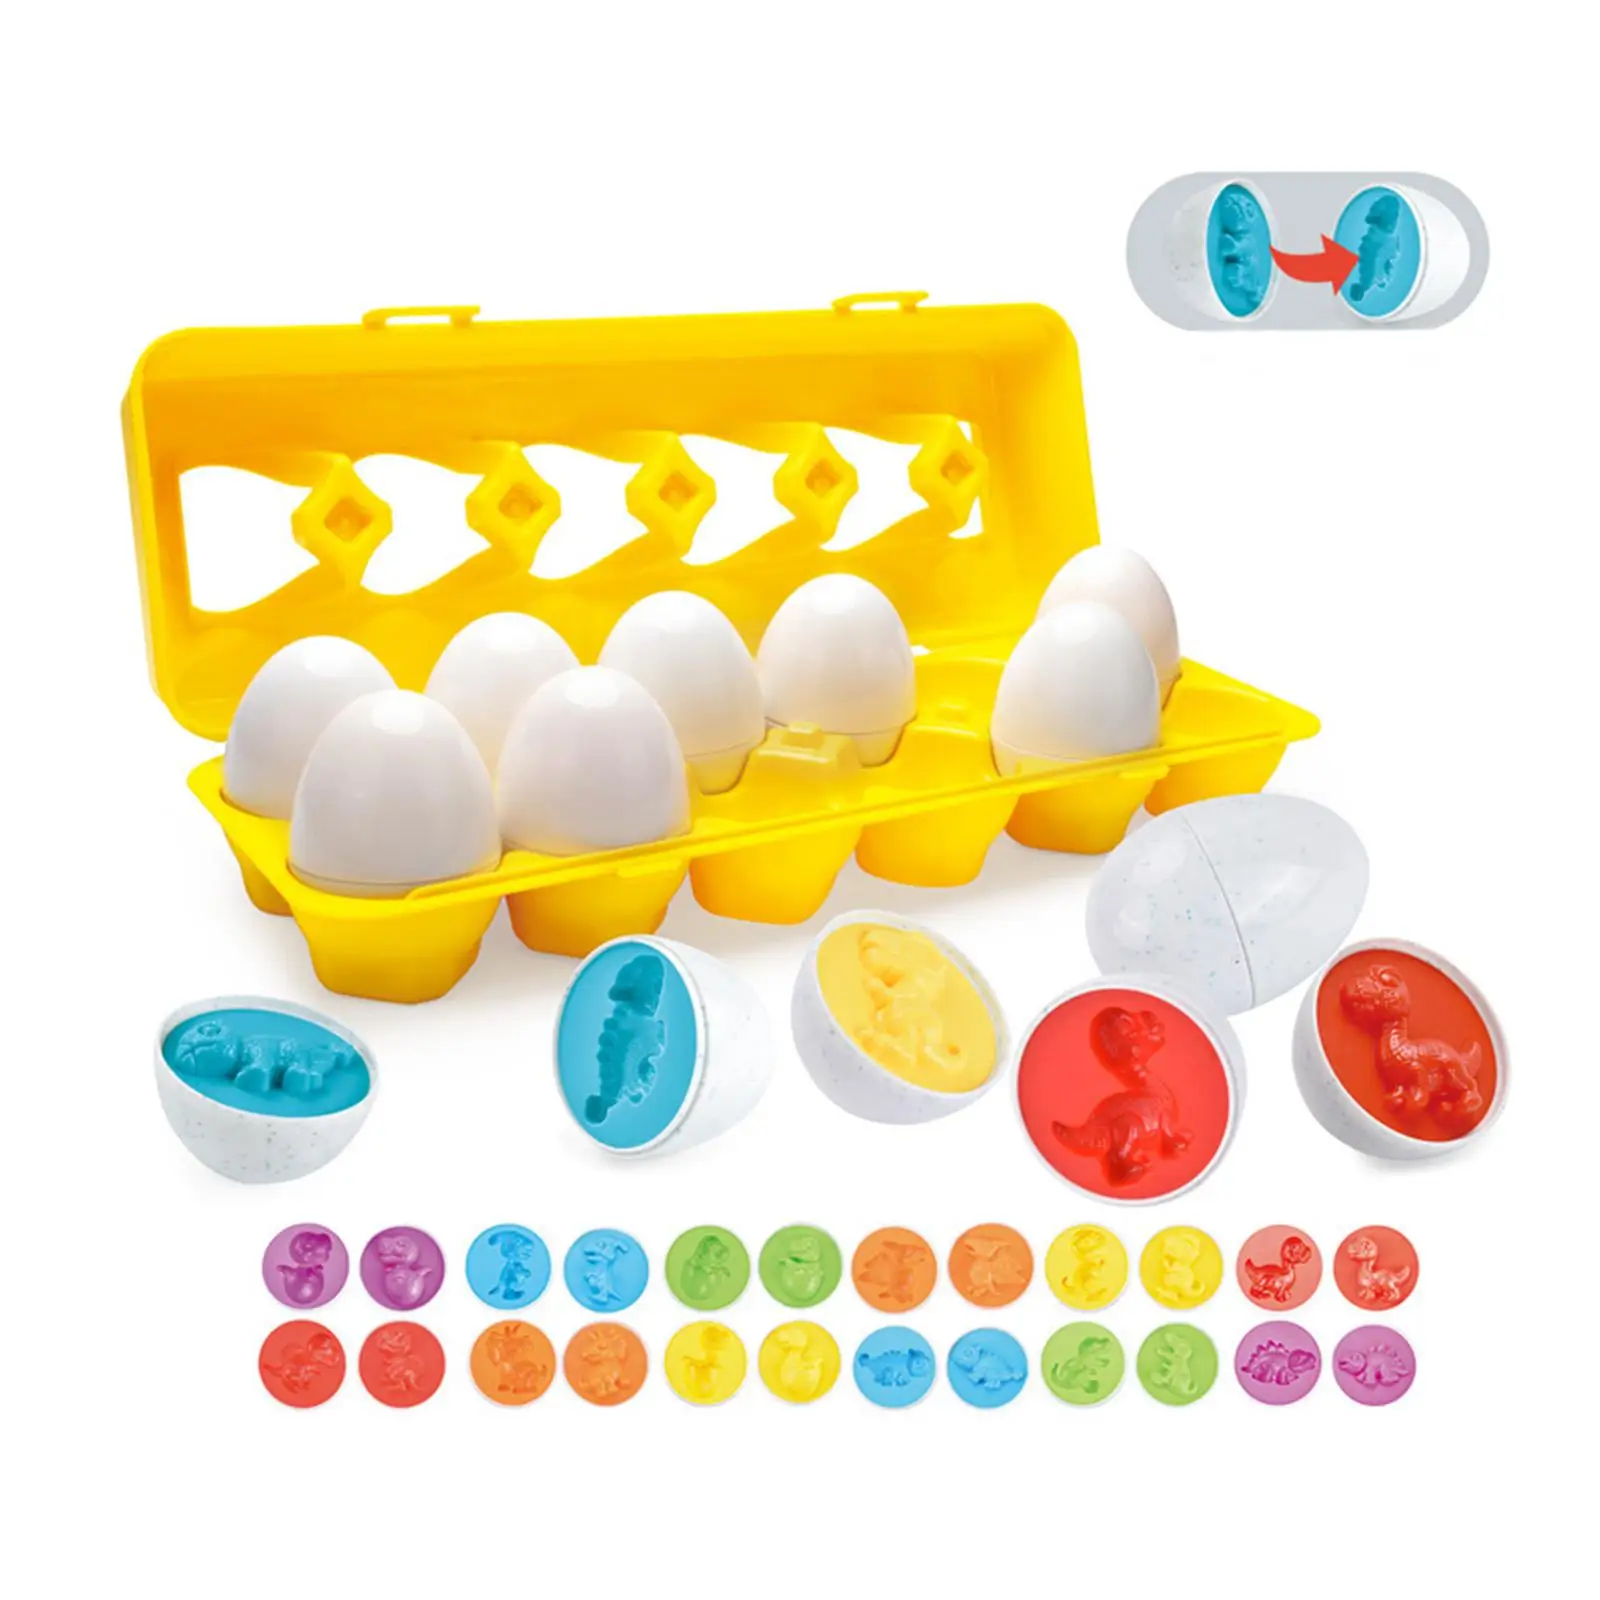 12Pcs Matching Egg Play Set Sensory Toy Sorter Puzzle Toys for Infant Easter Basket Gift 3 4 5 6 Years Old Babies Children